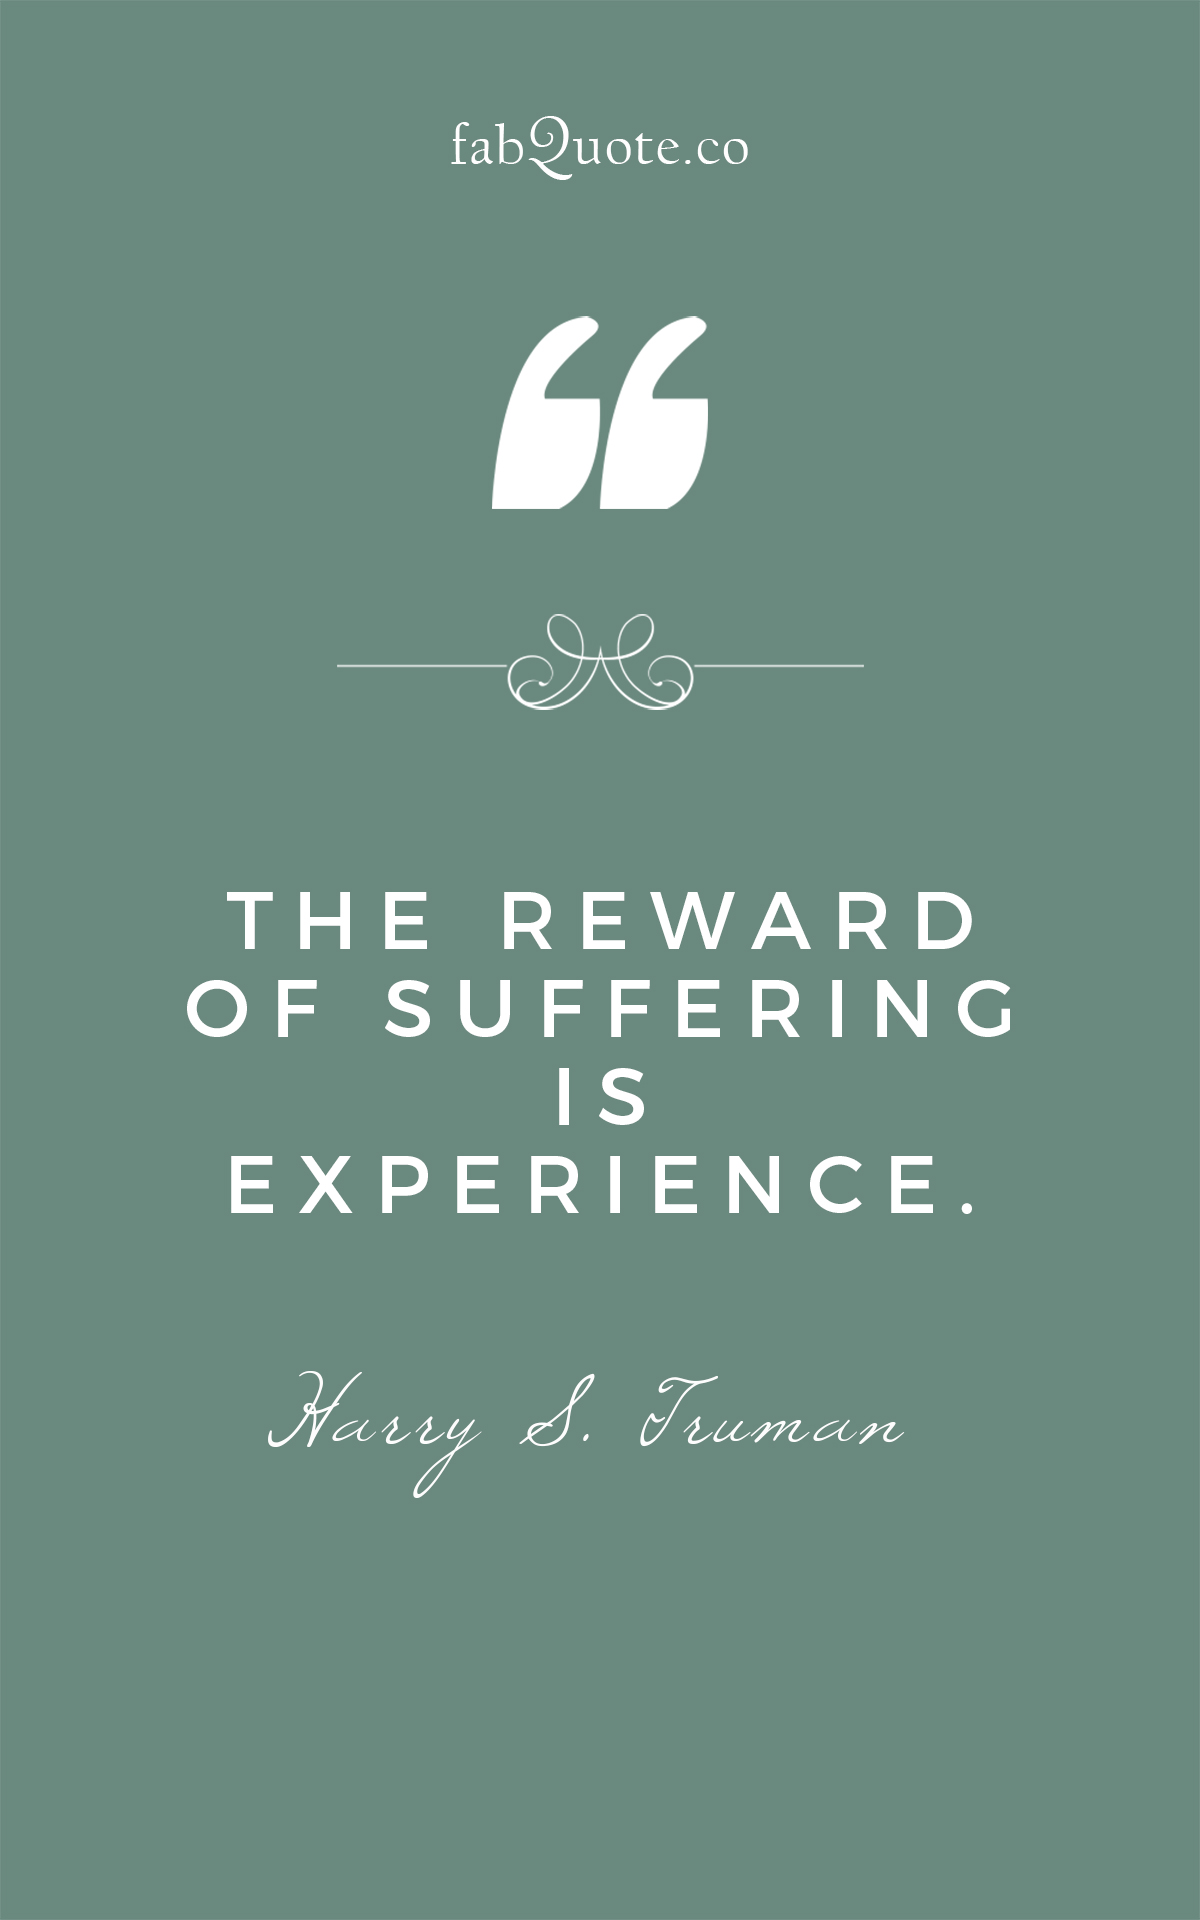 The reward of suffering is experience - Harry S. Truman